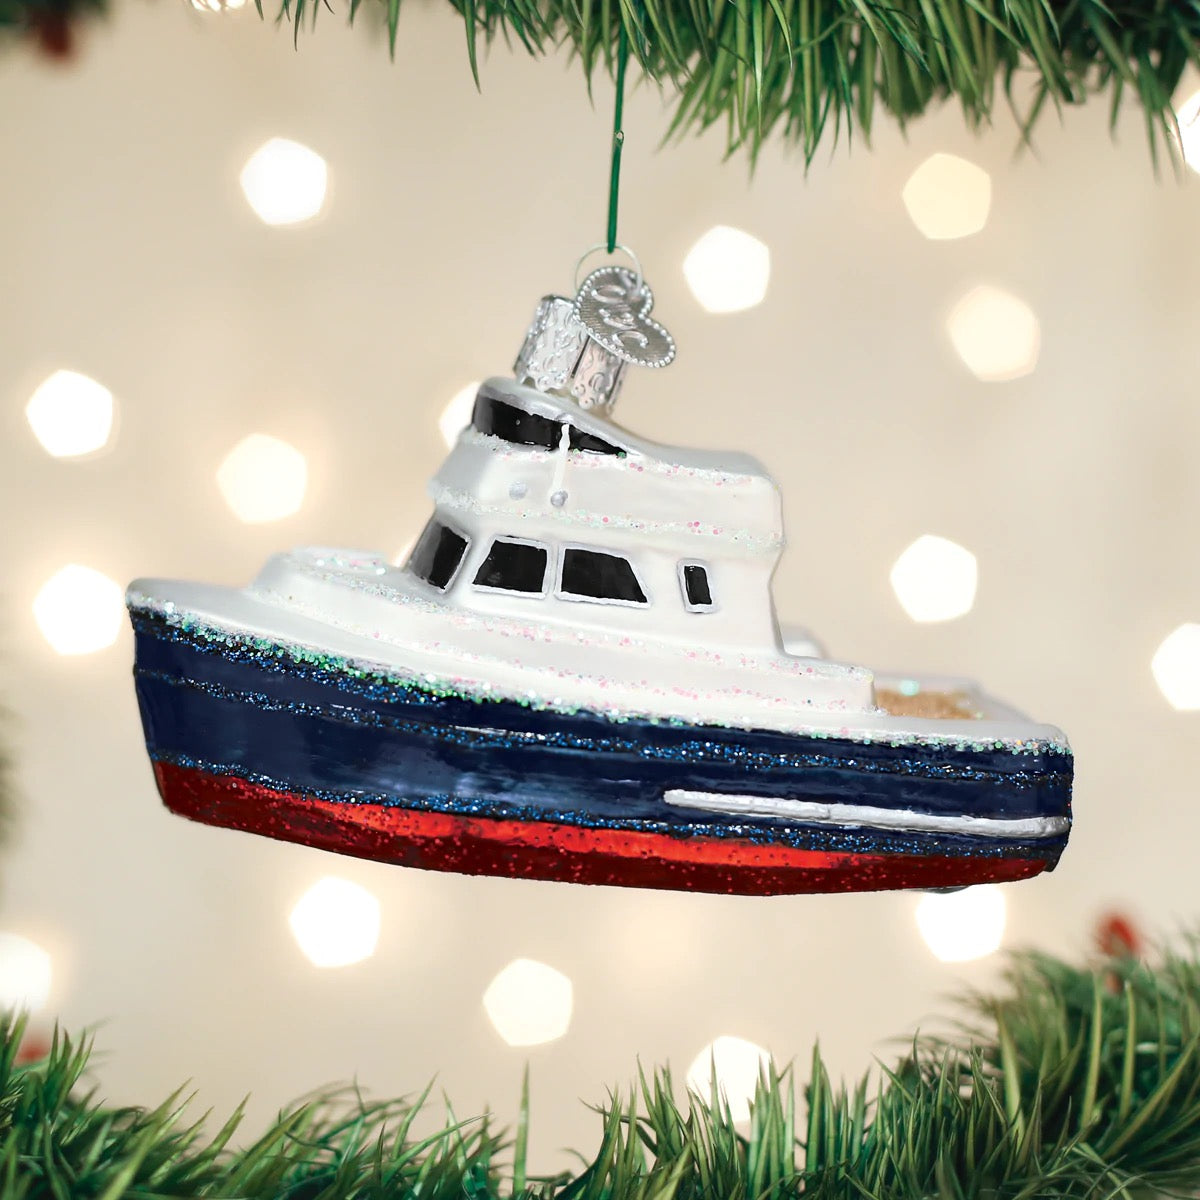 Charter Boat Ornament  Old World Christmas   